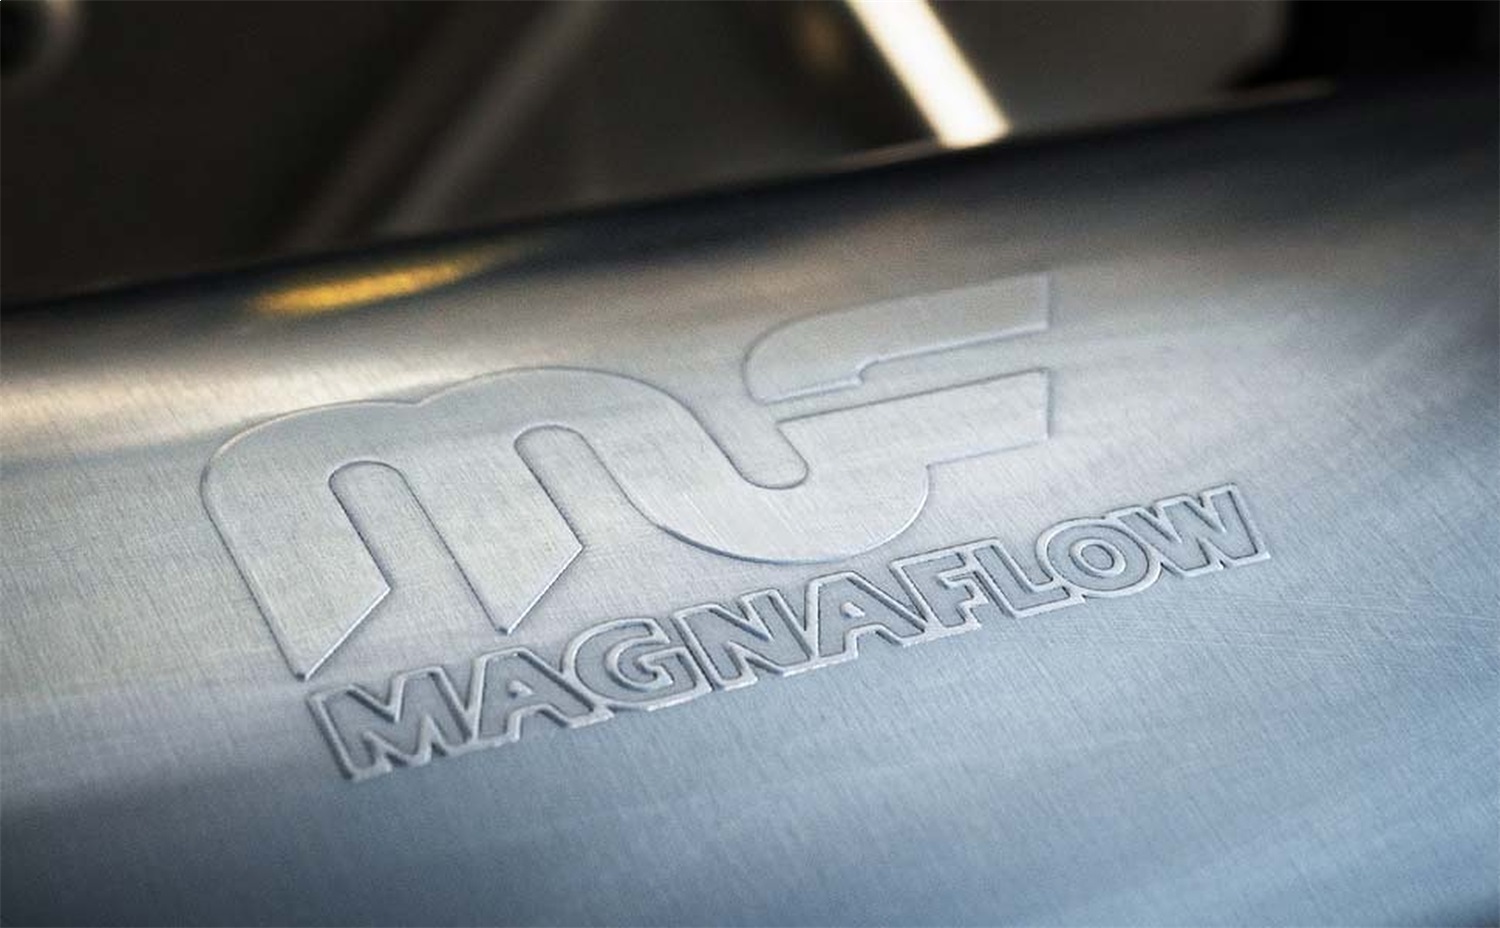 MagnaFlow Exhaust Products Magnaflow Performance Exhaust 12641 Stainless Steel Muffler